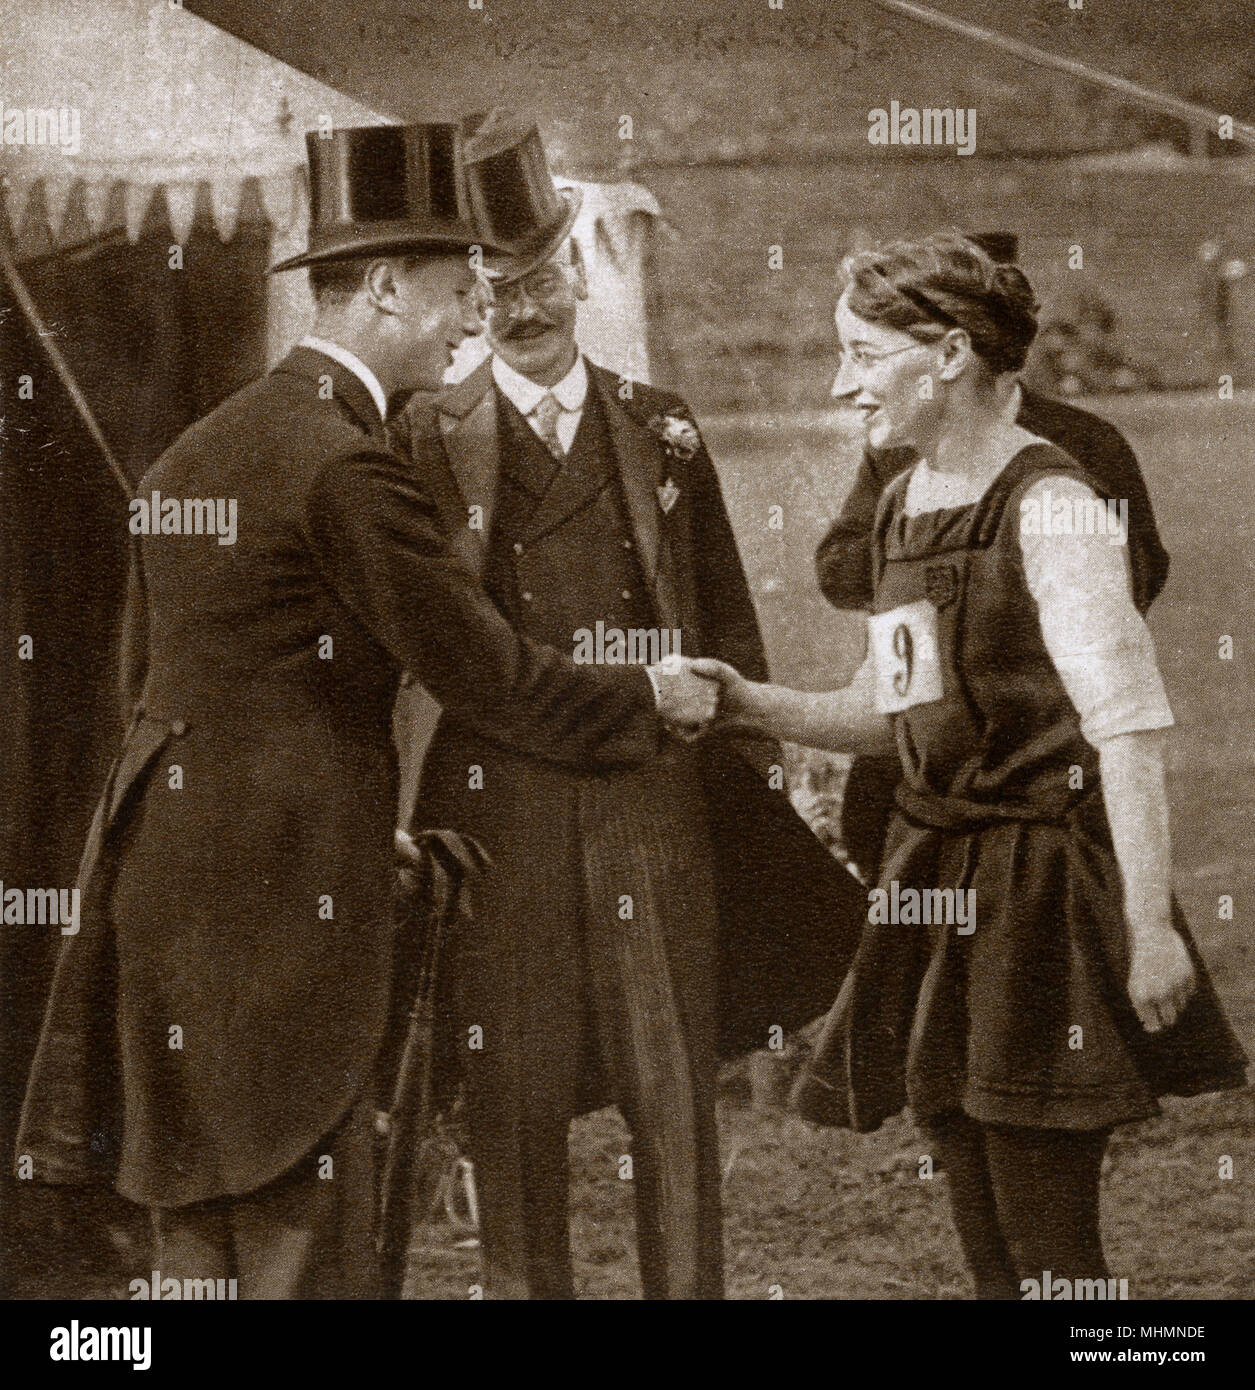 Prince Albert (future King George VI) (1895-1952), who had just become Duke of York visiting the Civil Service Sports Day at Stamford Bridge (the home of Chelsea Football Club). The picture shows him shaking hands with Miss D. Leach, a competitor.     Date: 1920 Stock Photo